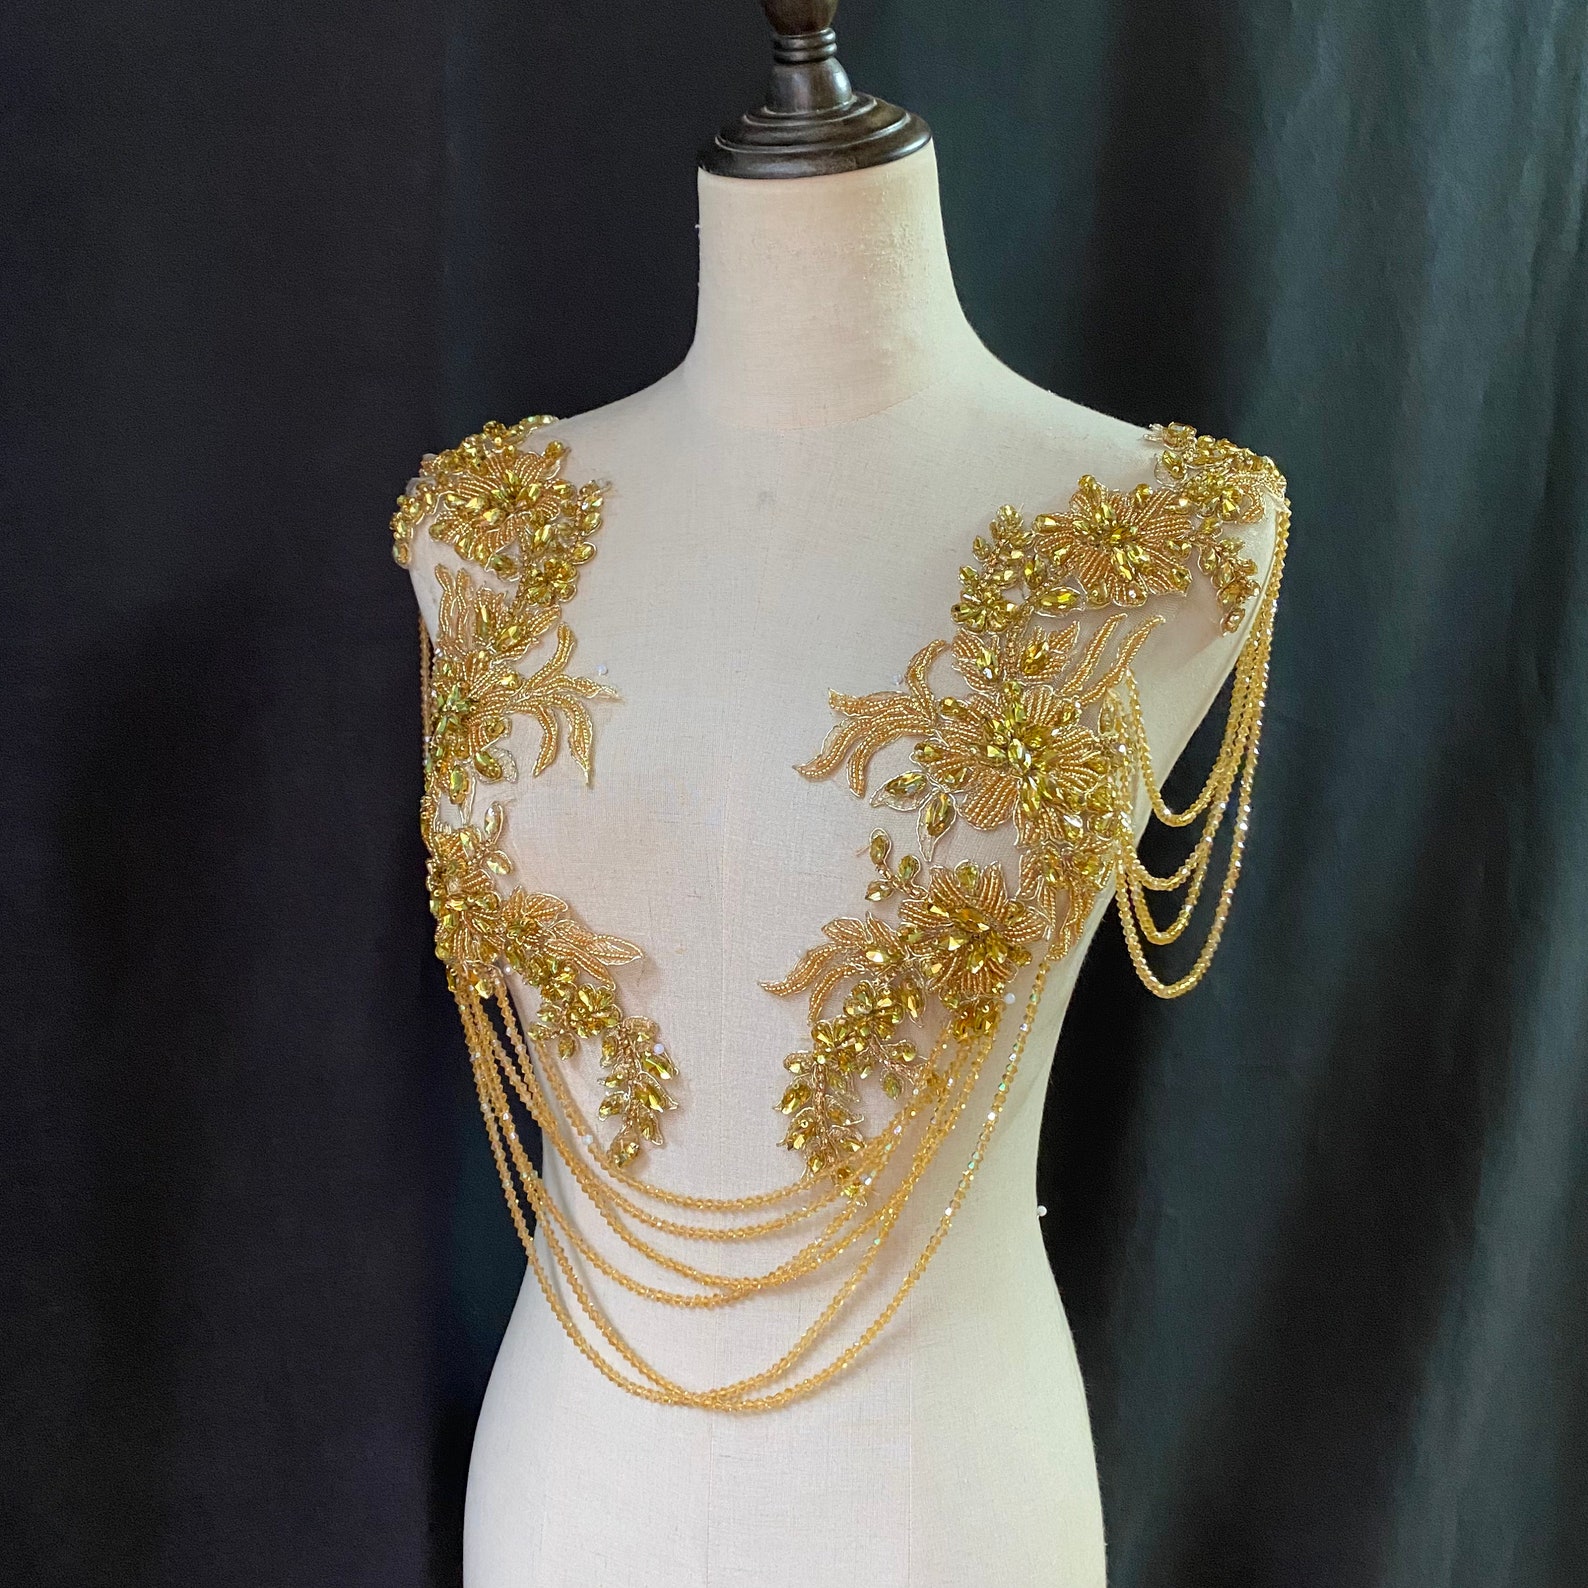 Gold Rhinestone Applique With Fringe and Chains for Dress - Etsy